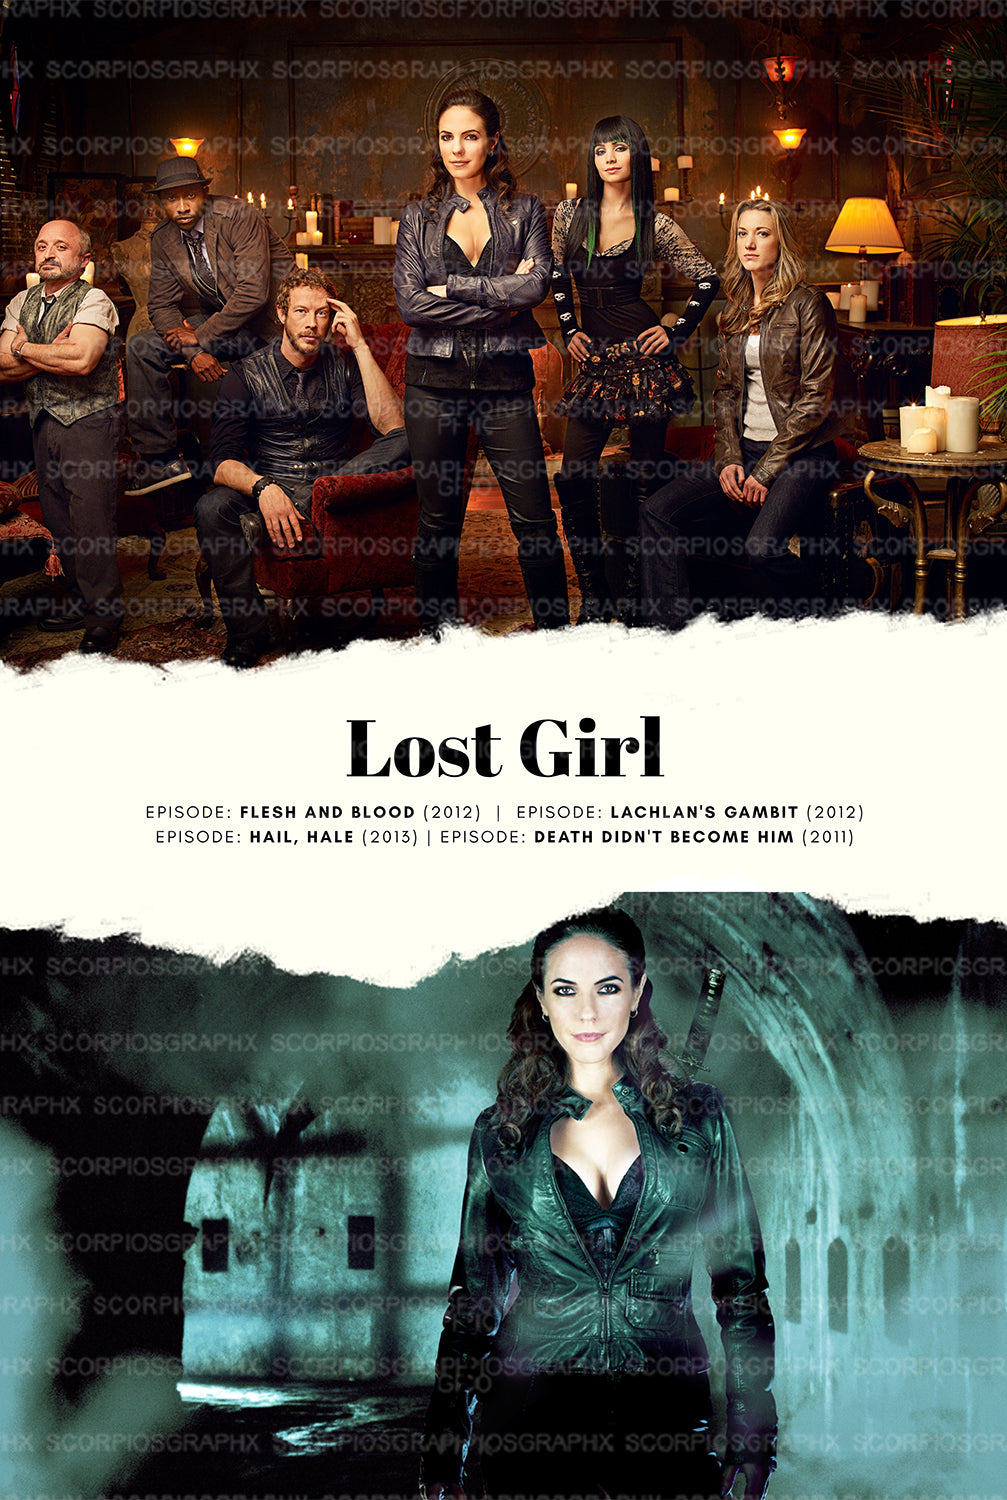 Lost Girl Episode Poster - Wall Art Printable